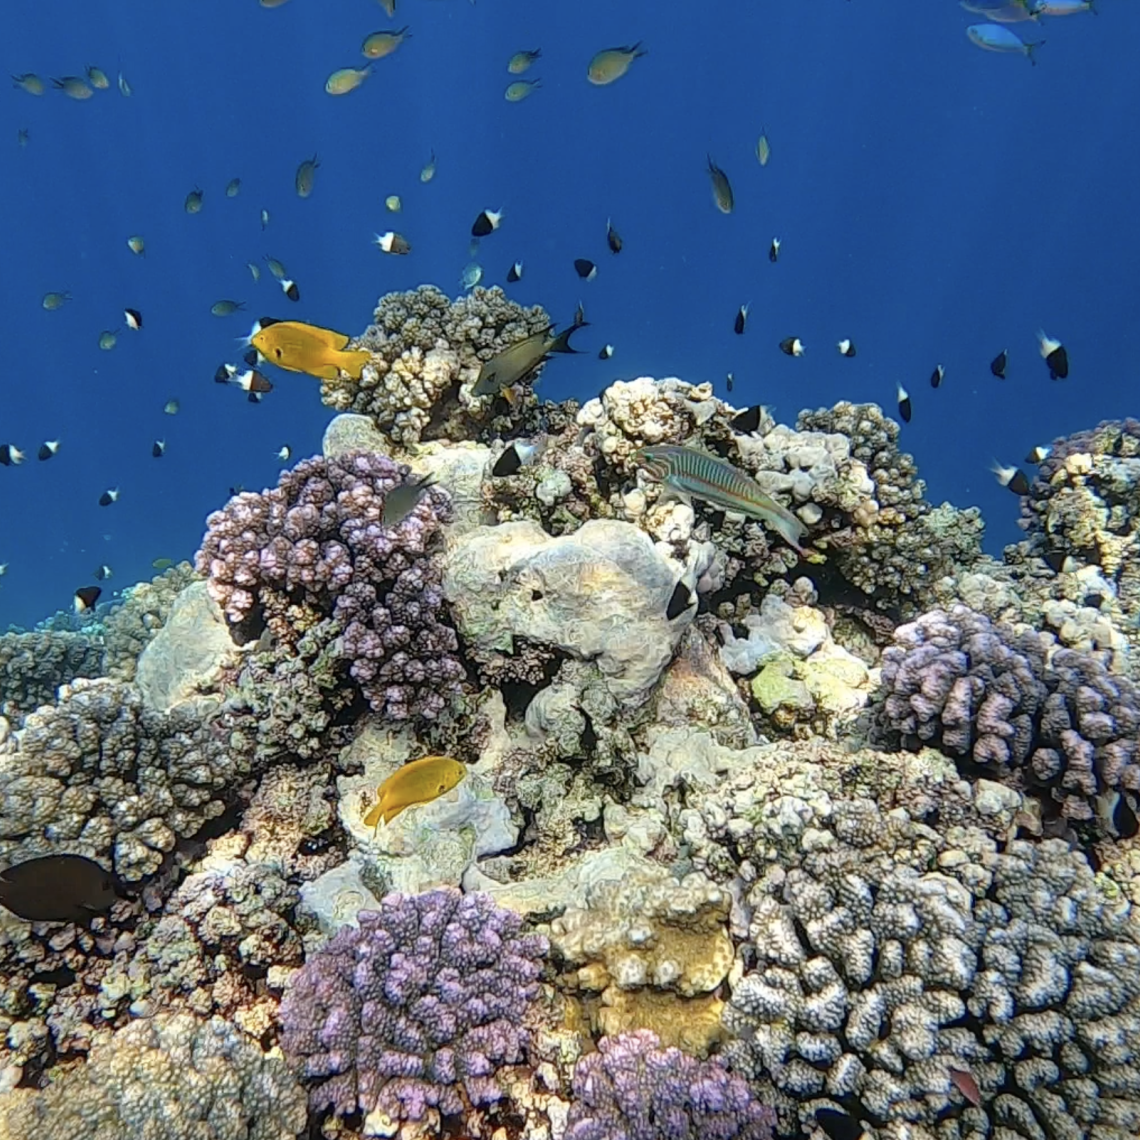 The corals in the Red Sea